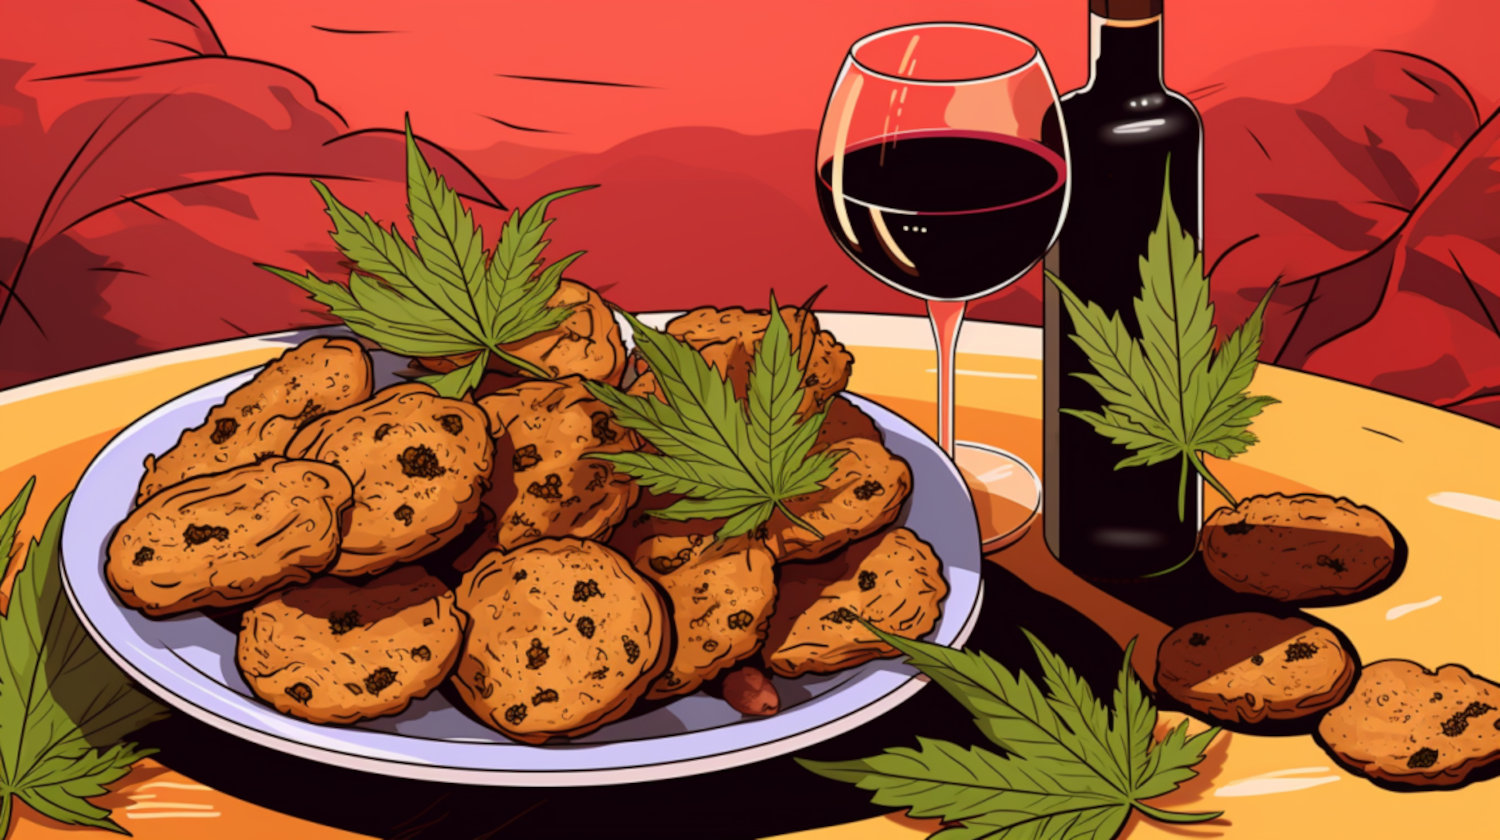 Is combining edibles and alcohol safe?